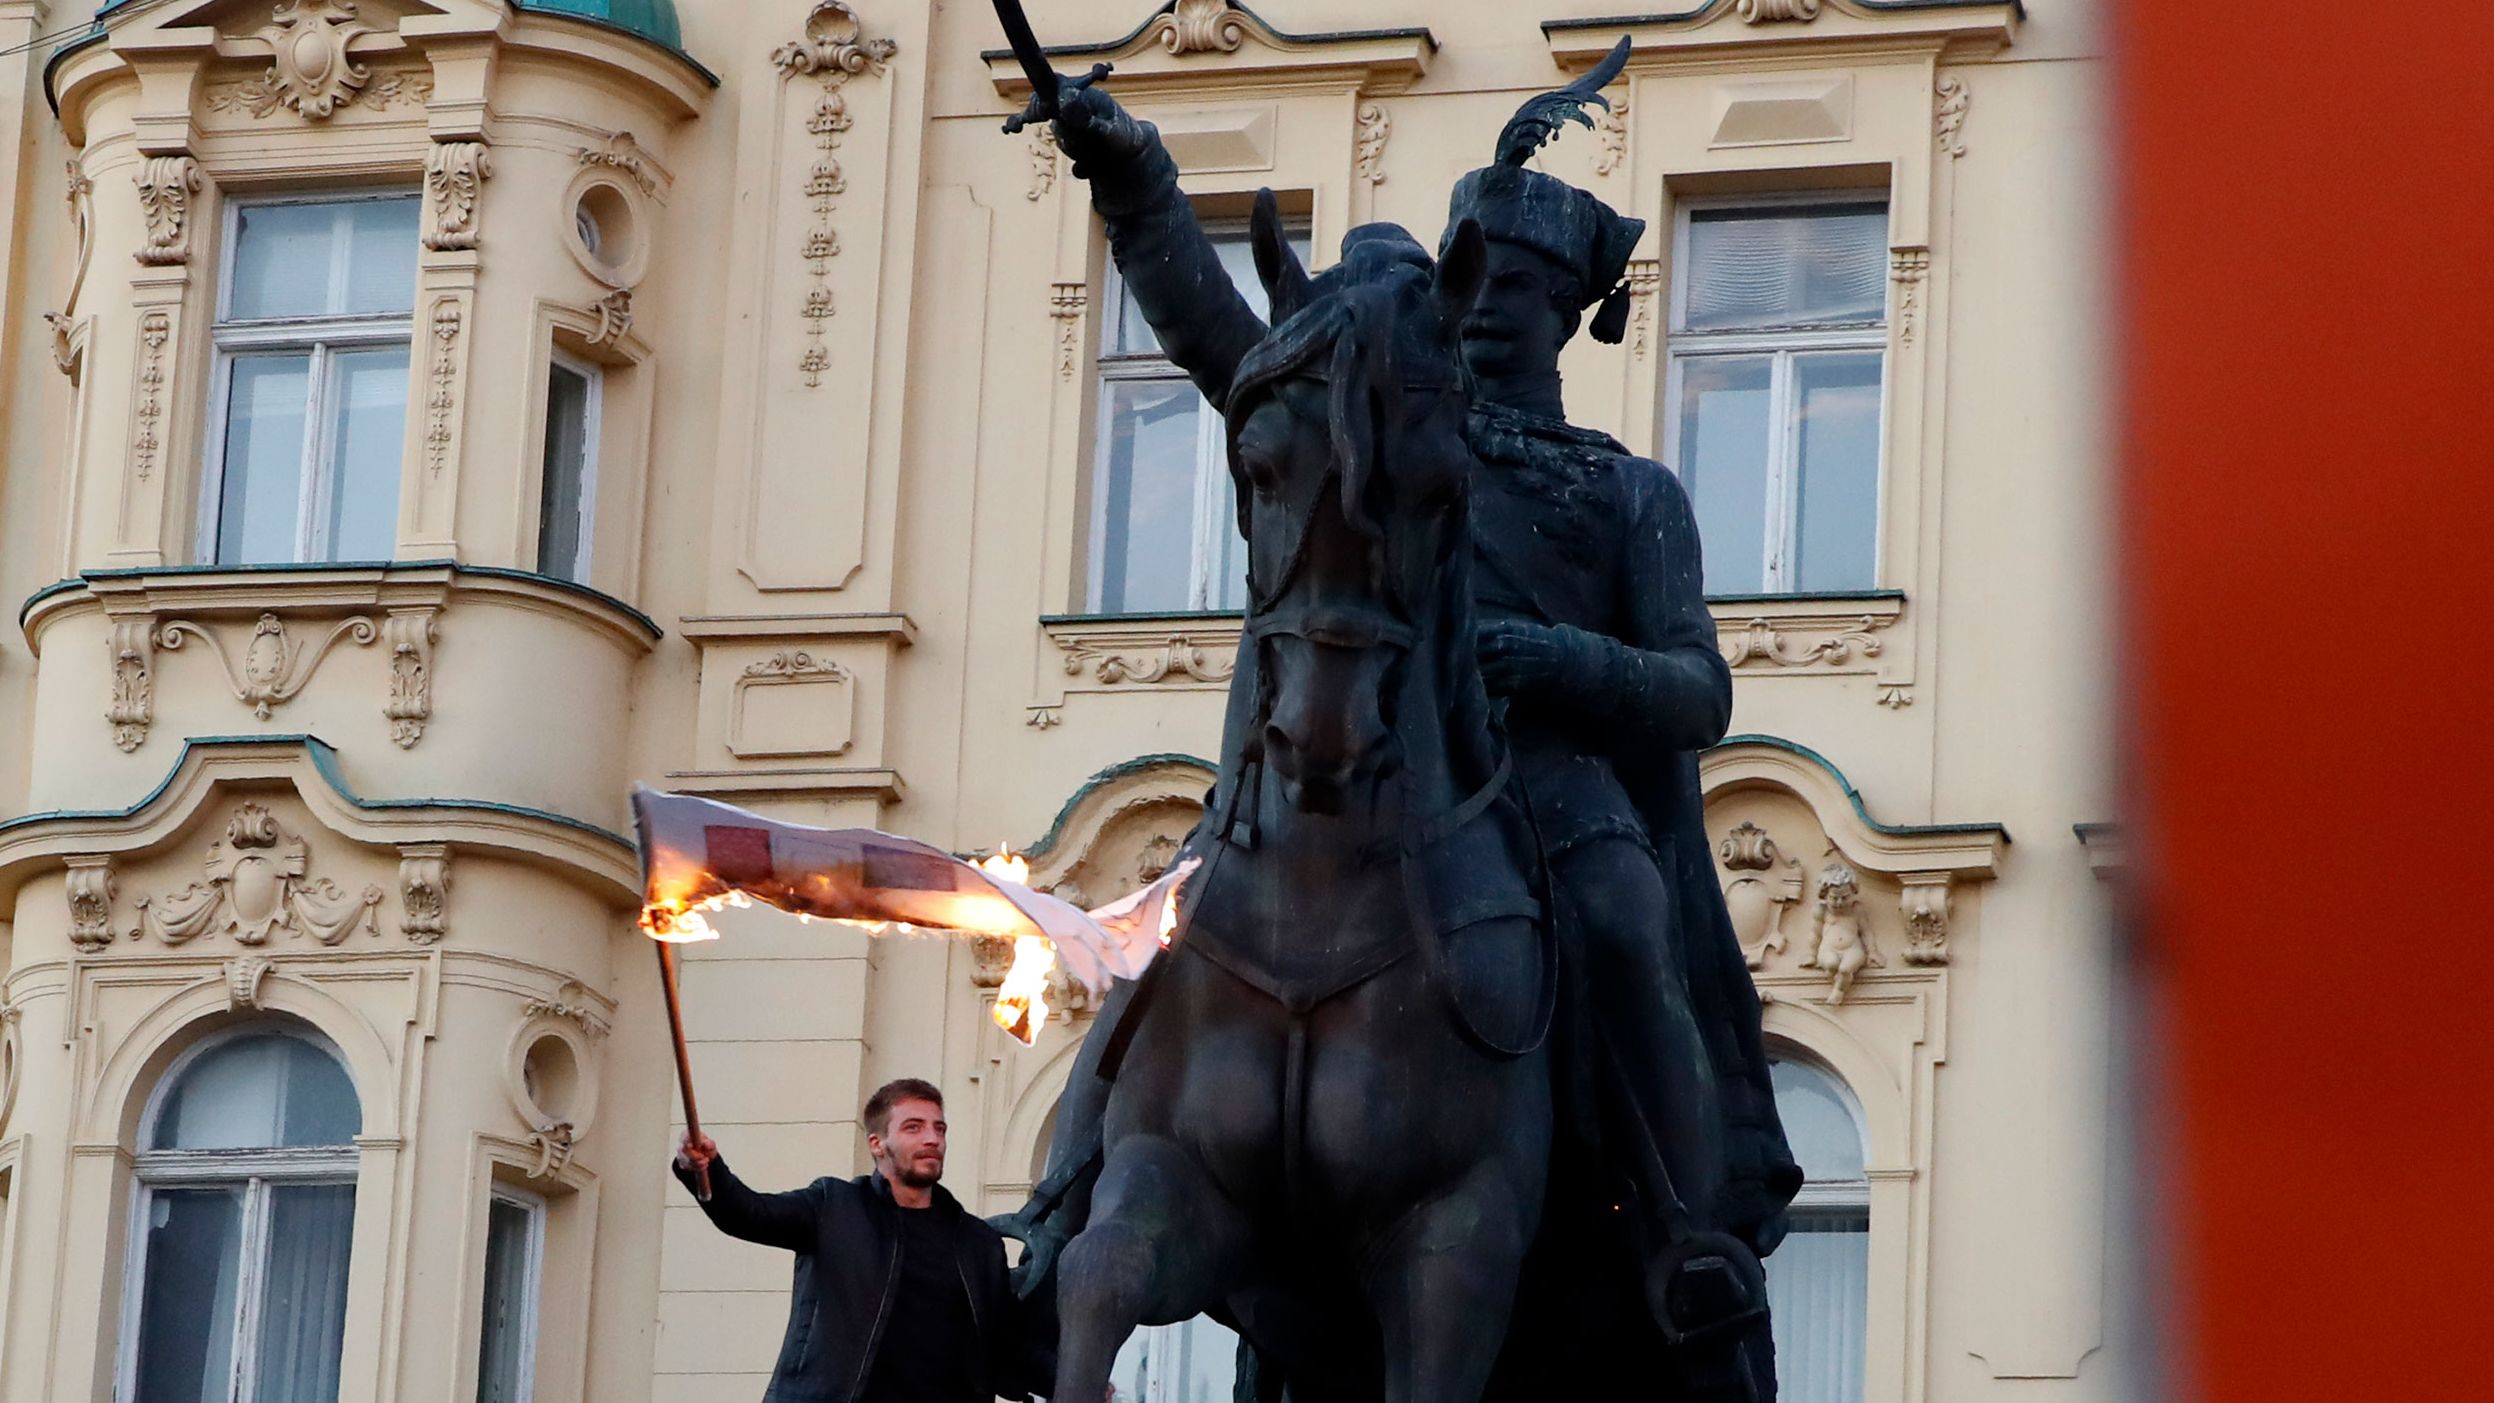 A man burns a flag during a protest in Zagreb, Croatia, on Saturday. Around 15,000 people were protesting the Croatian government's coronavirus measures. From Monday, only people with Covid passports can enter government and public buildings in Croatia.